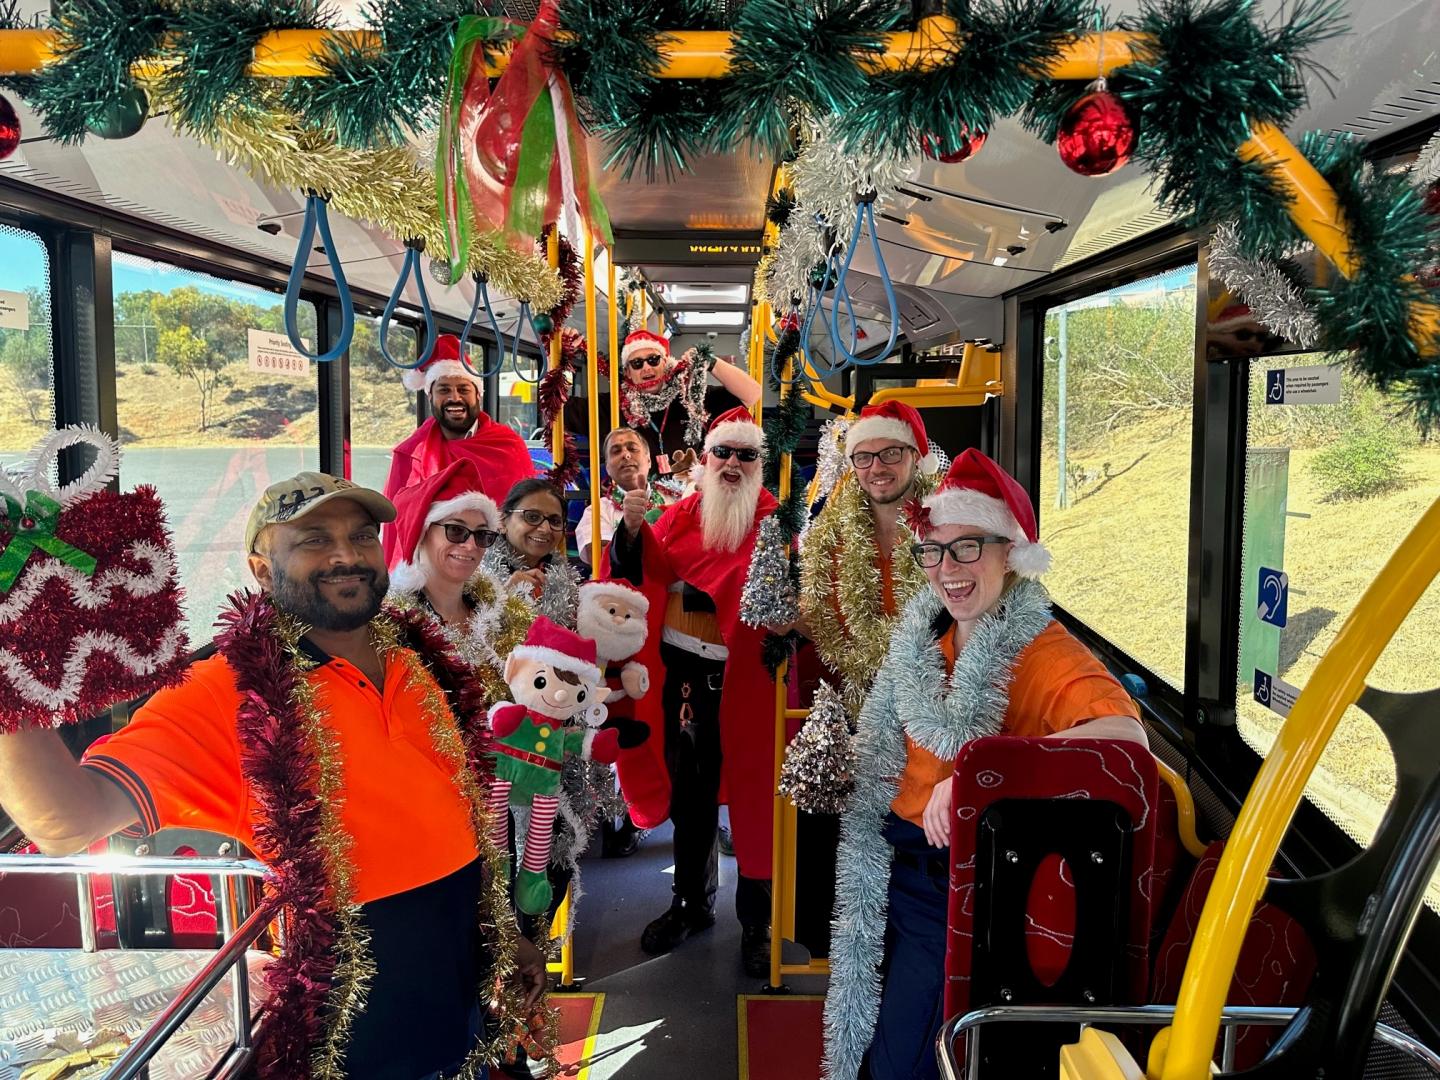 South Australian Busways employee dressed in Christmas costume on a decorated Christmas bus